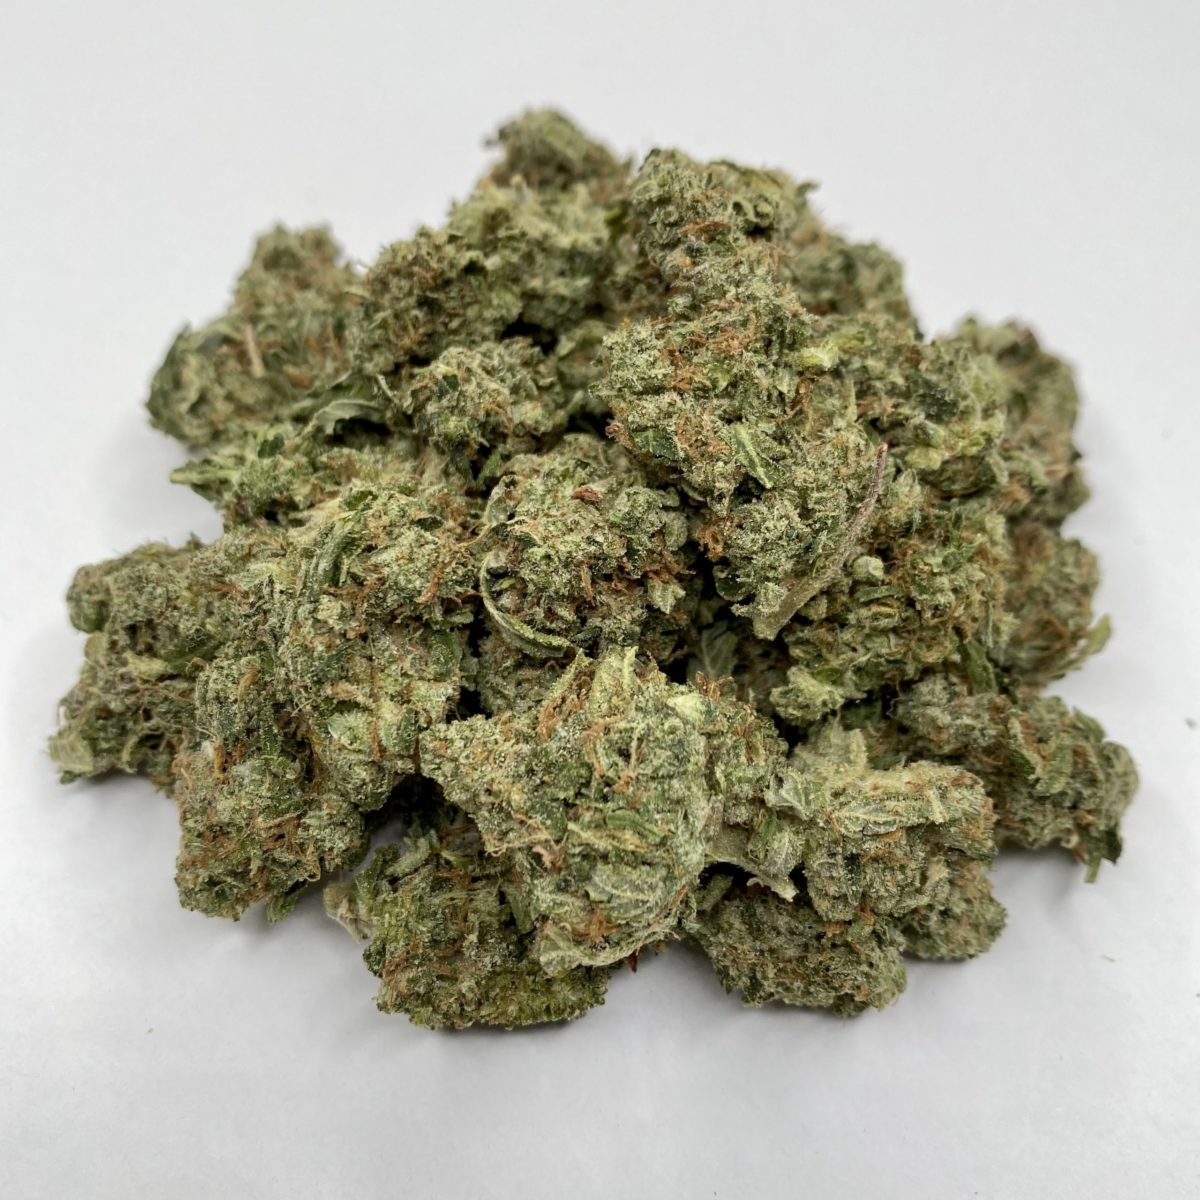 Buy weed online Pine Tar Kush strain from My Green Solution online dispensary and mail order marijuana weed shop. buying weed online. cannabis canada. Vape pen. Buy master kush weed.